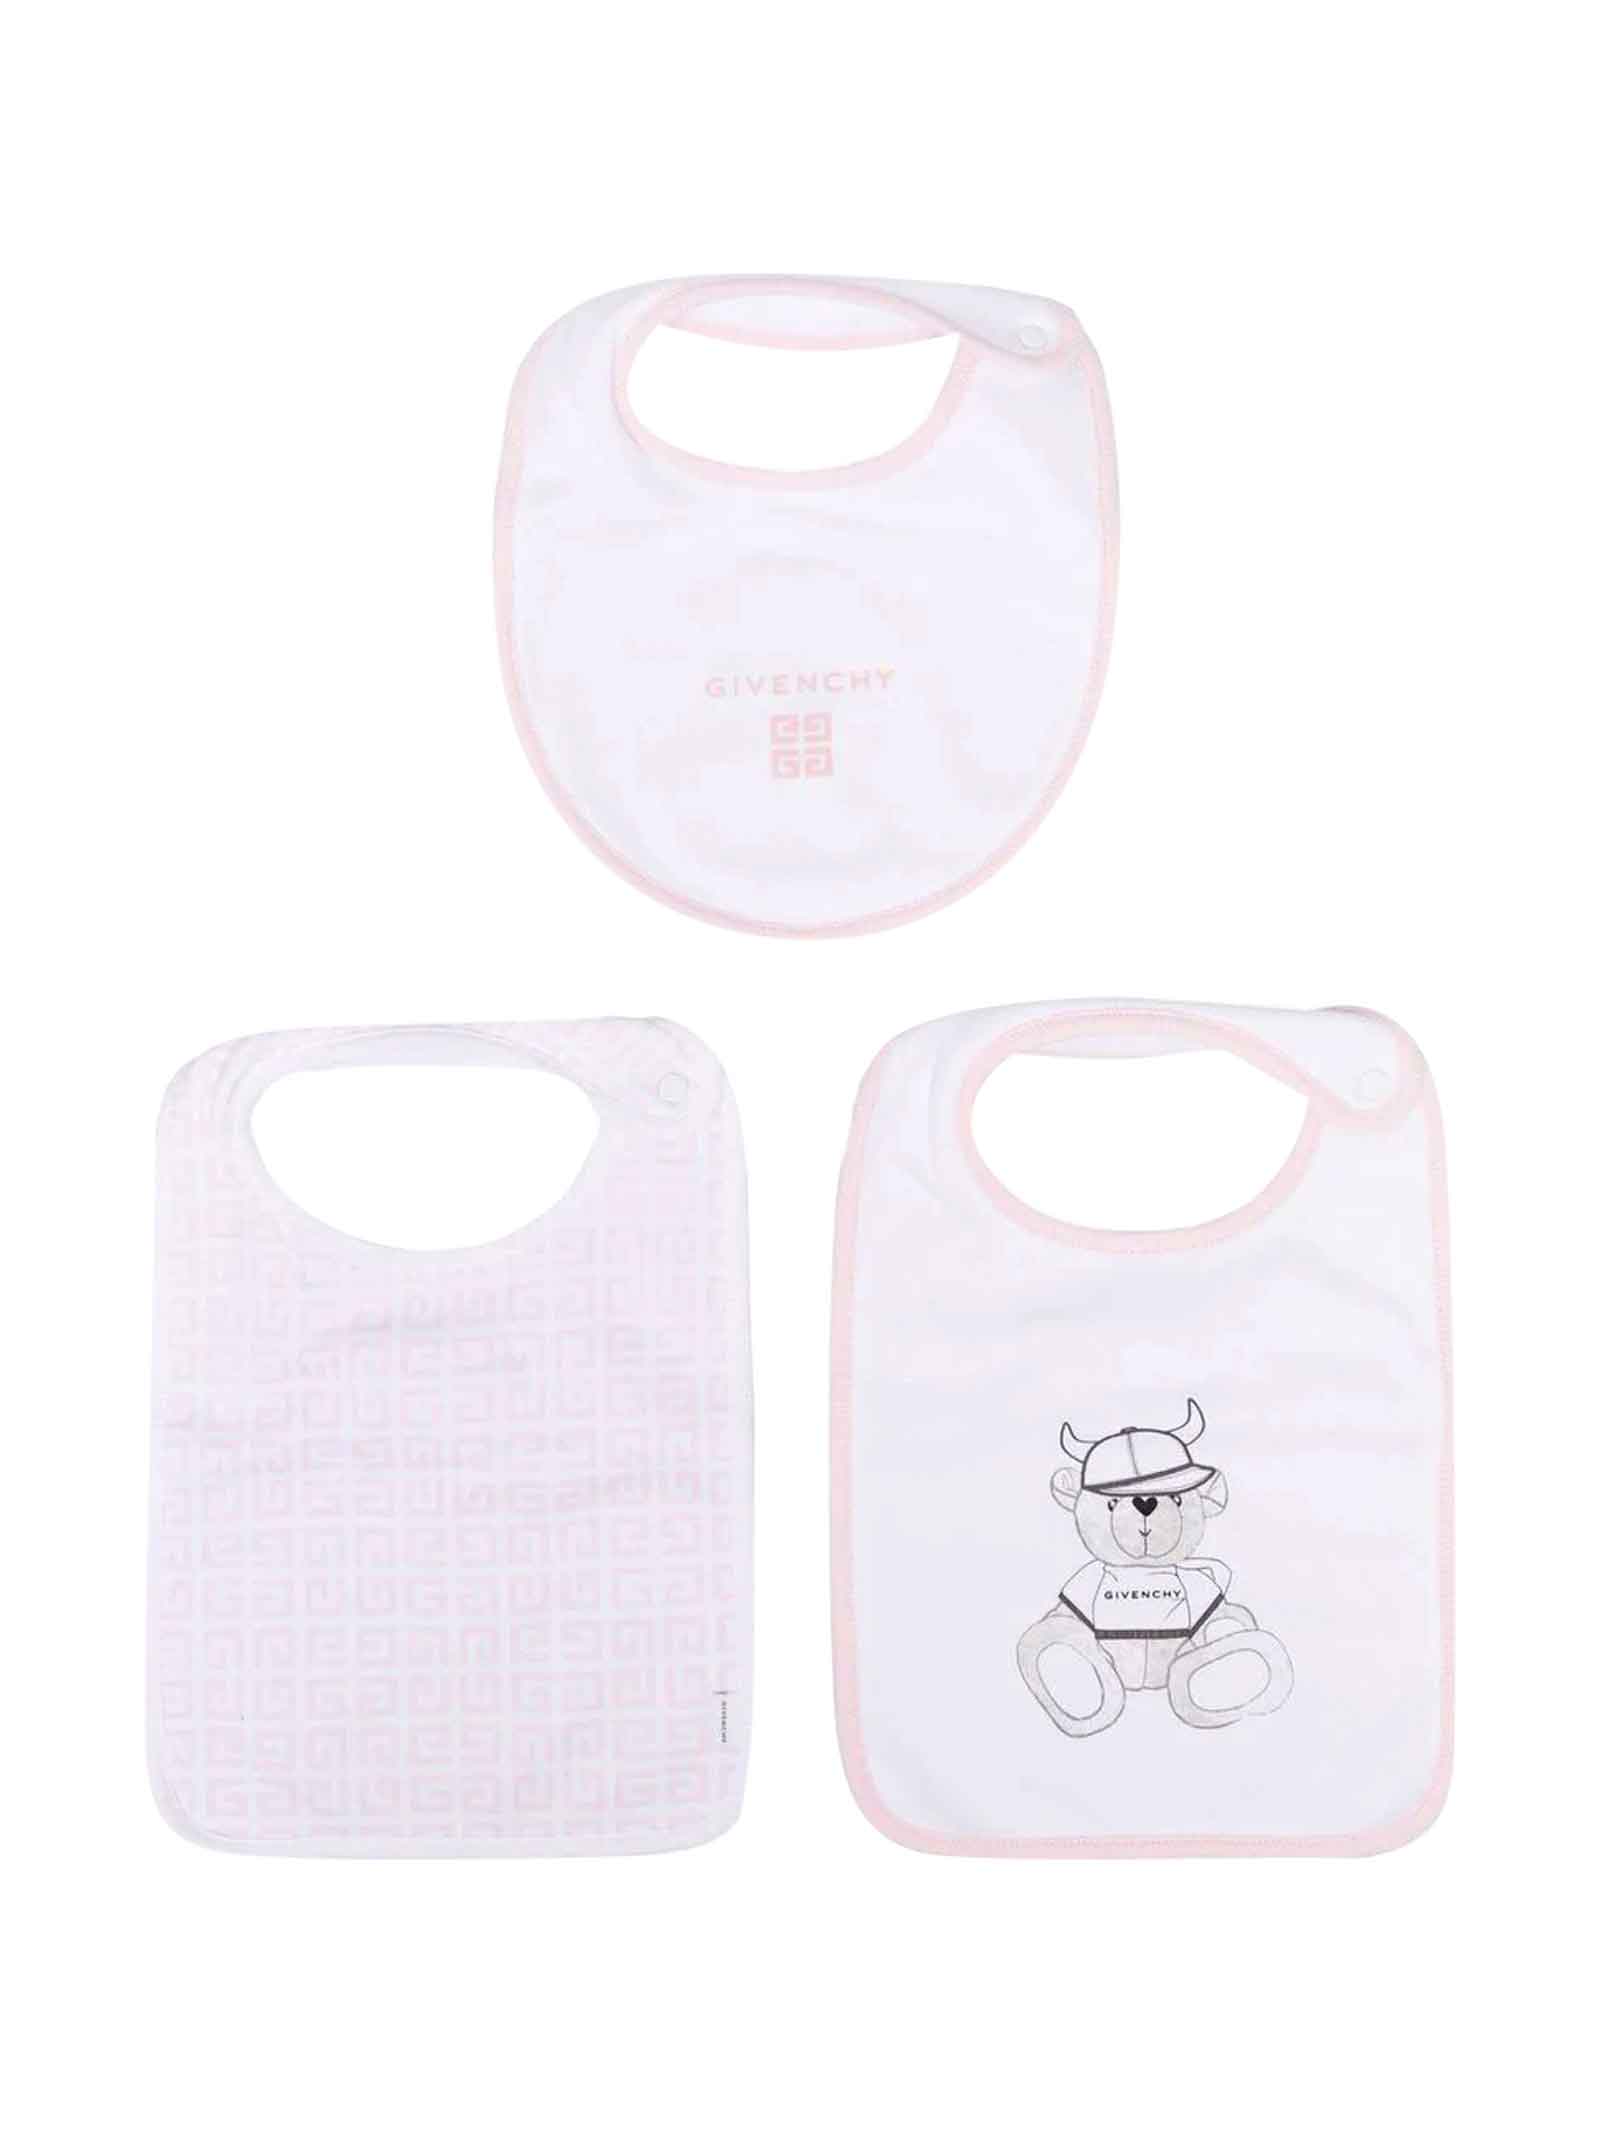 Givenchy Baby Girl Set Of 3 Pink Bibs